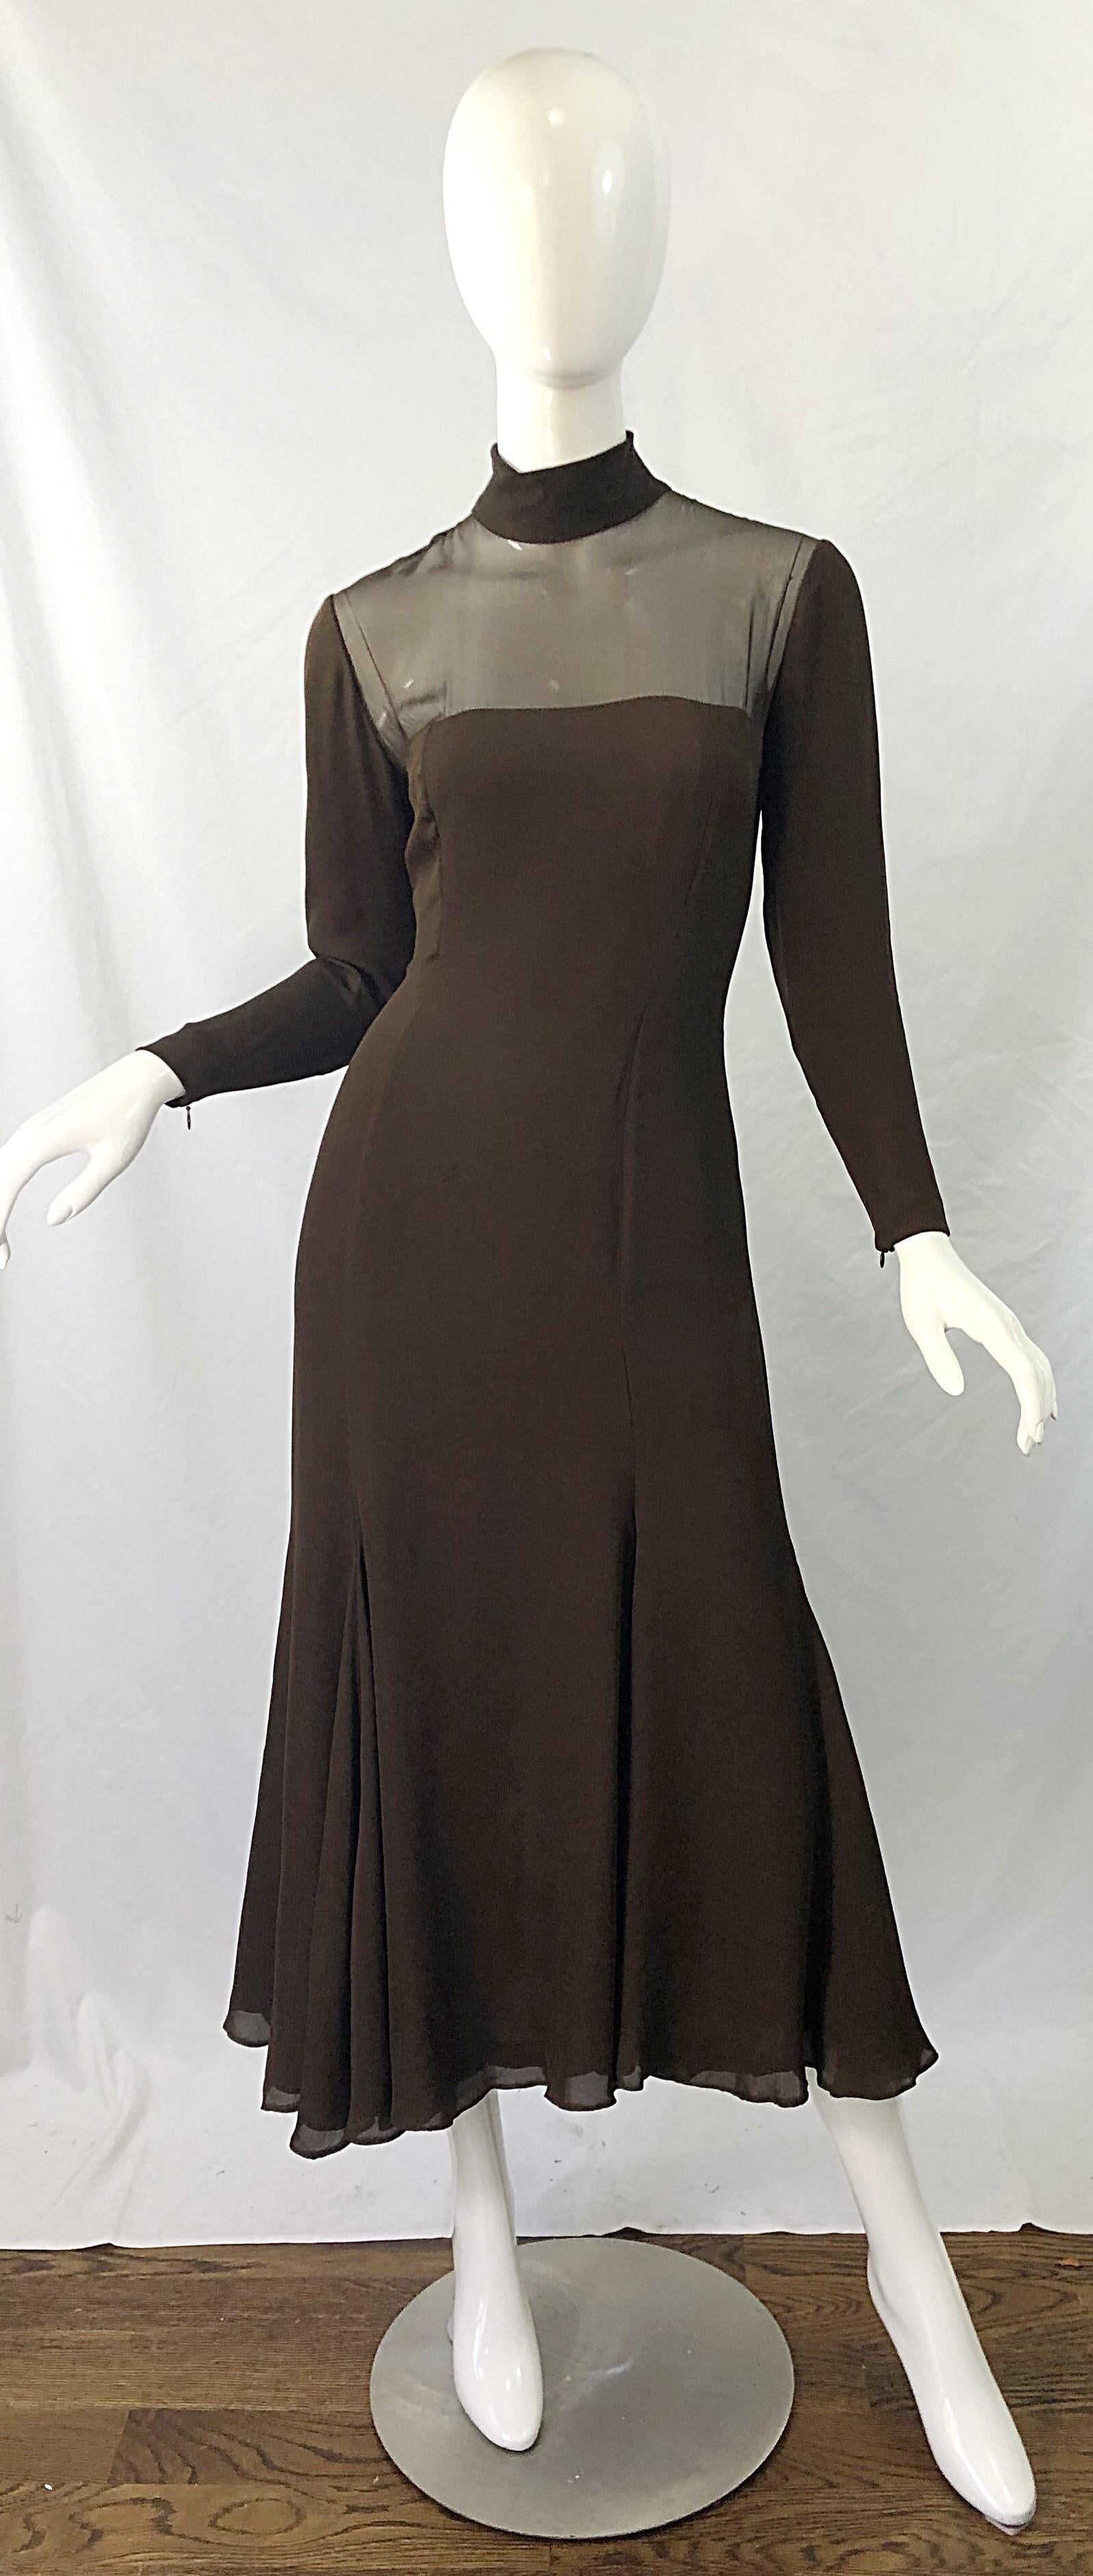 Beautiful 1970s NOLAN MILLER COUTURE chocolate brown silk chiffon long sleeve midi dress ! Miller, who was the famed designer for all the wardrobe on 